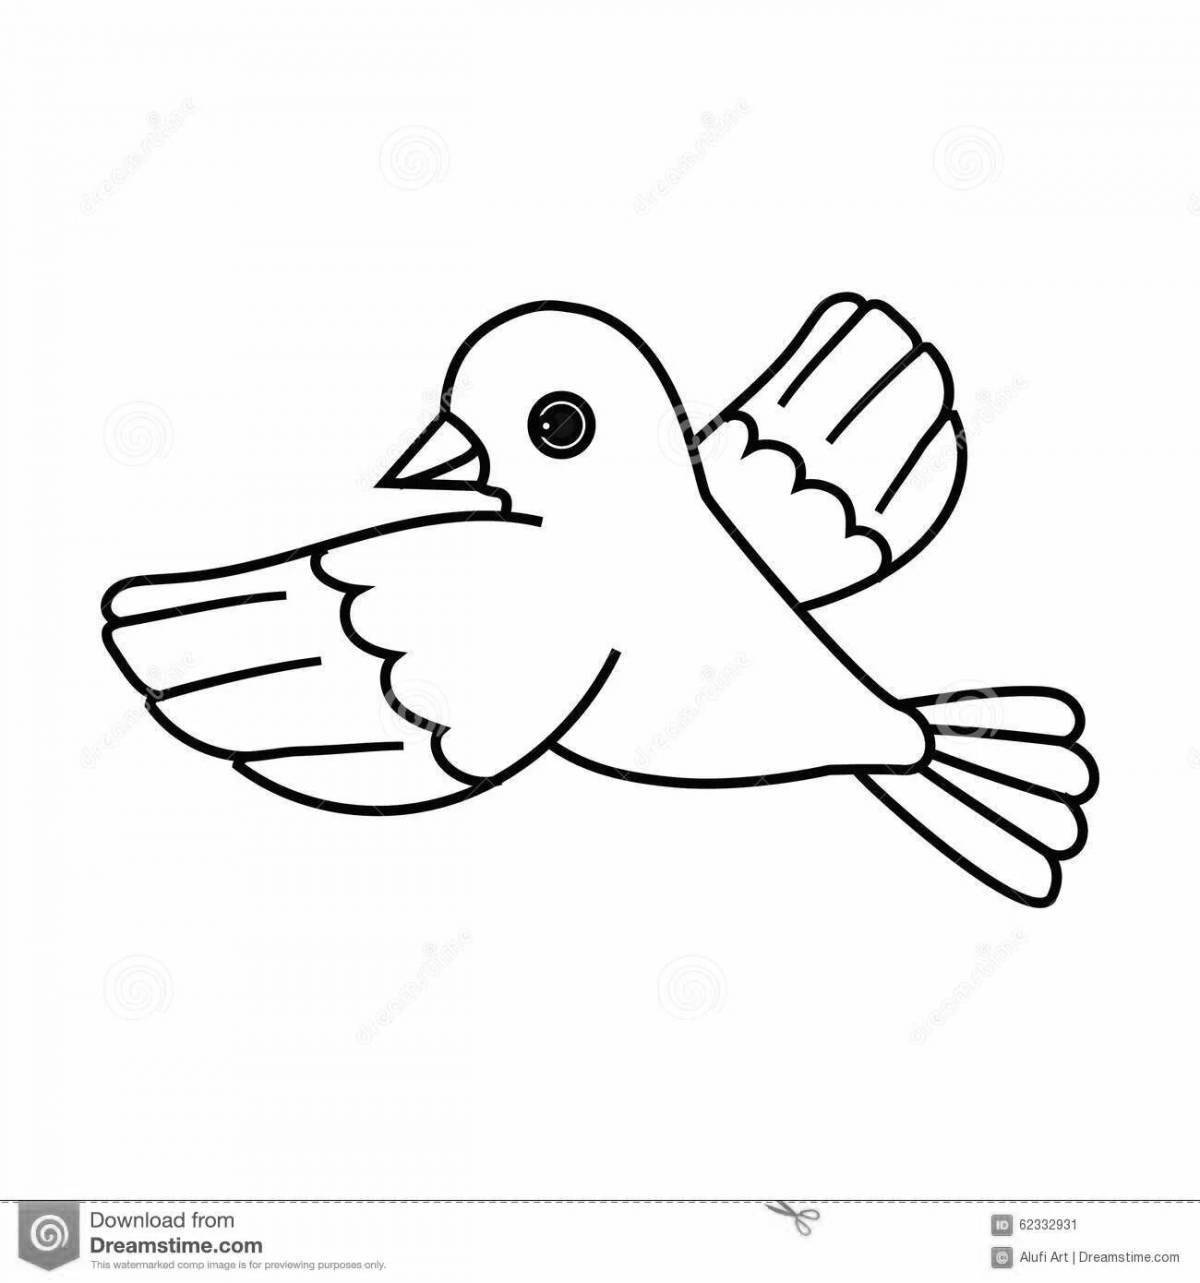 Coloring book shiny flying bird